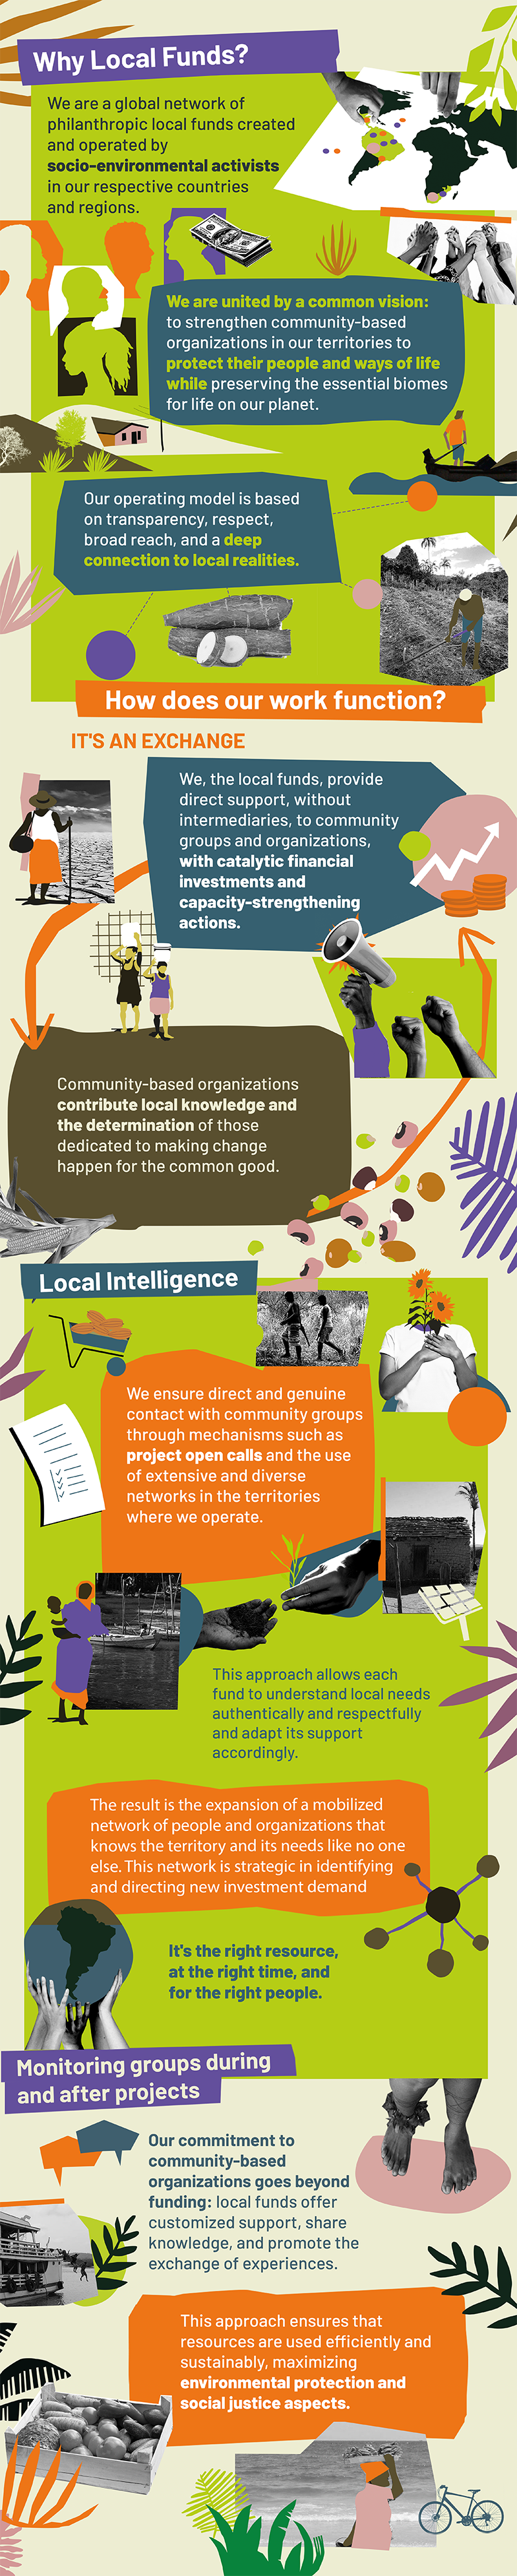 Why local funds - infographic